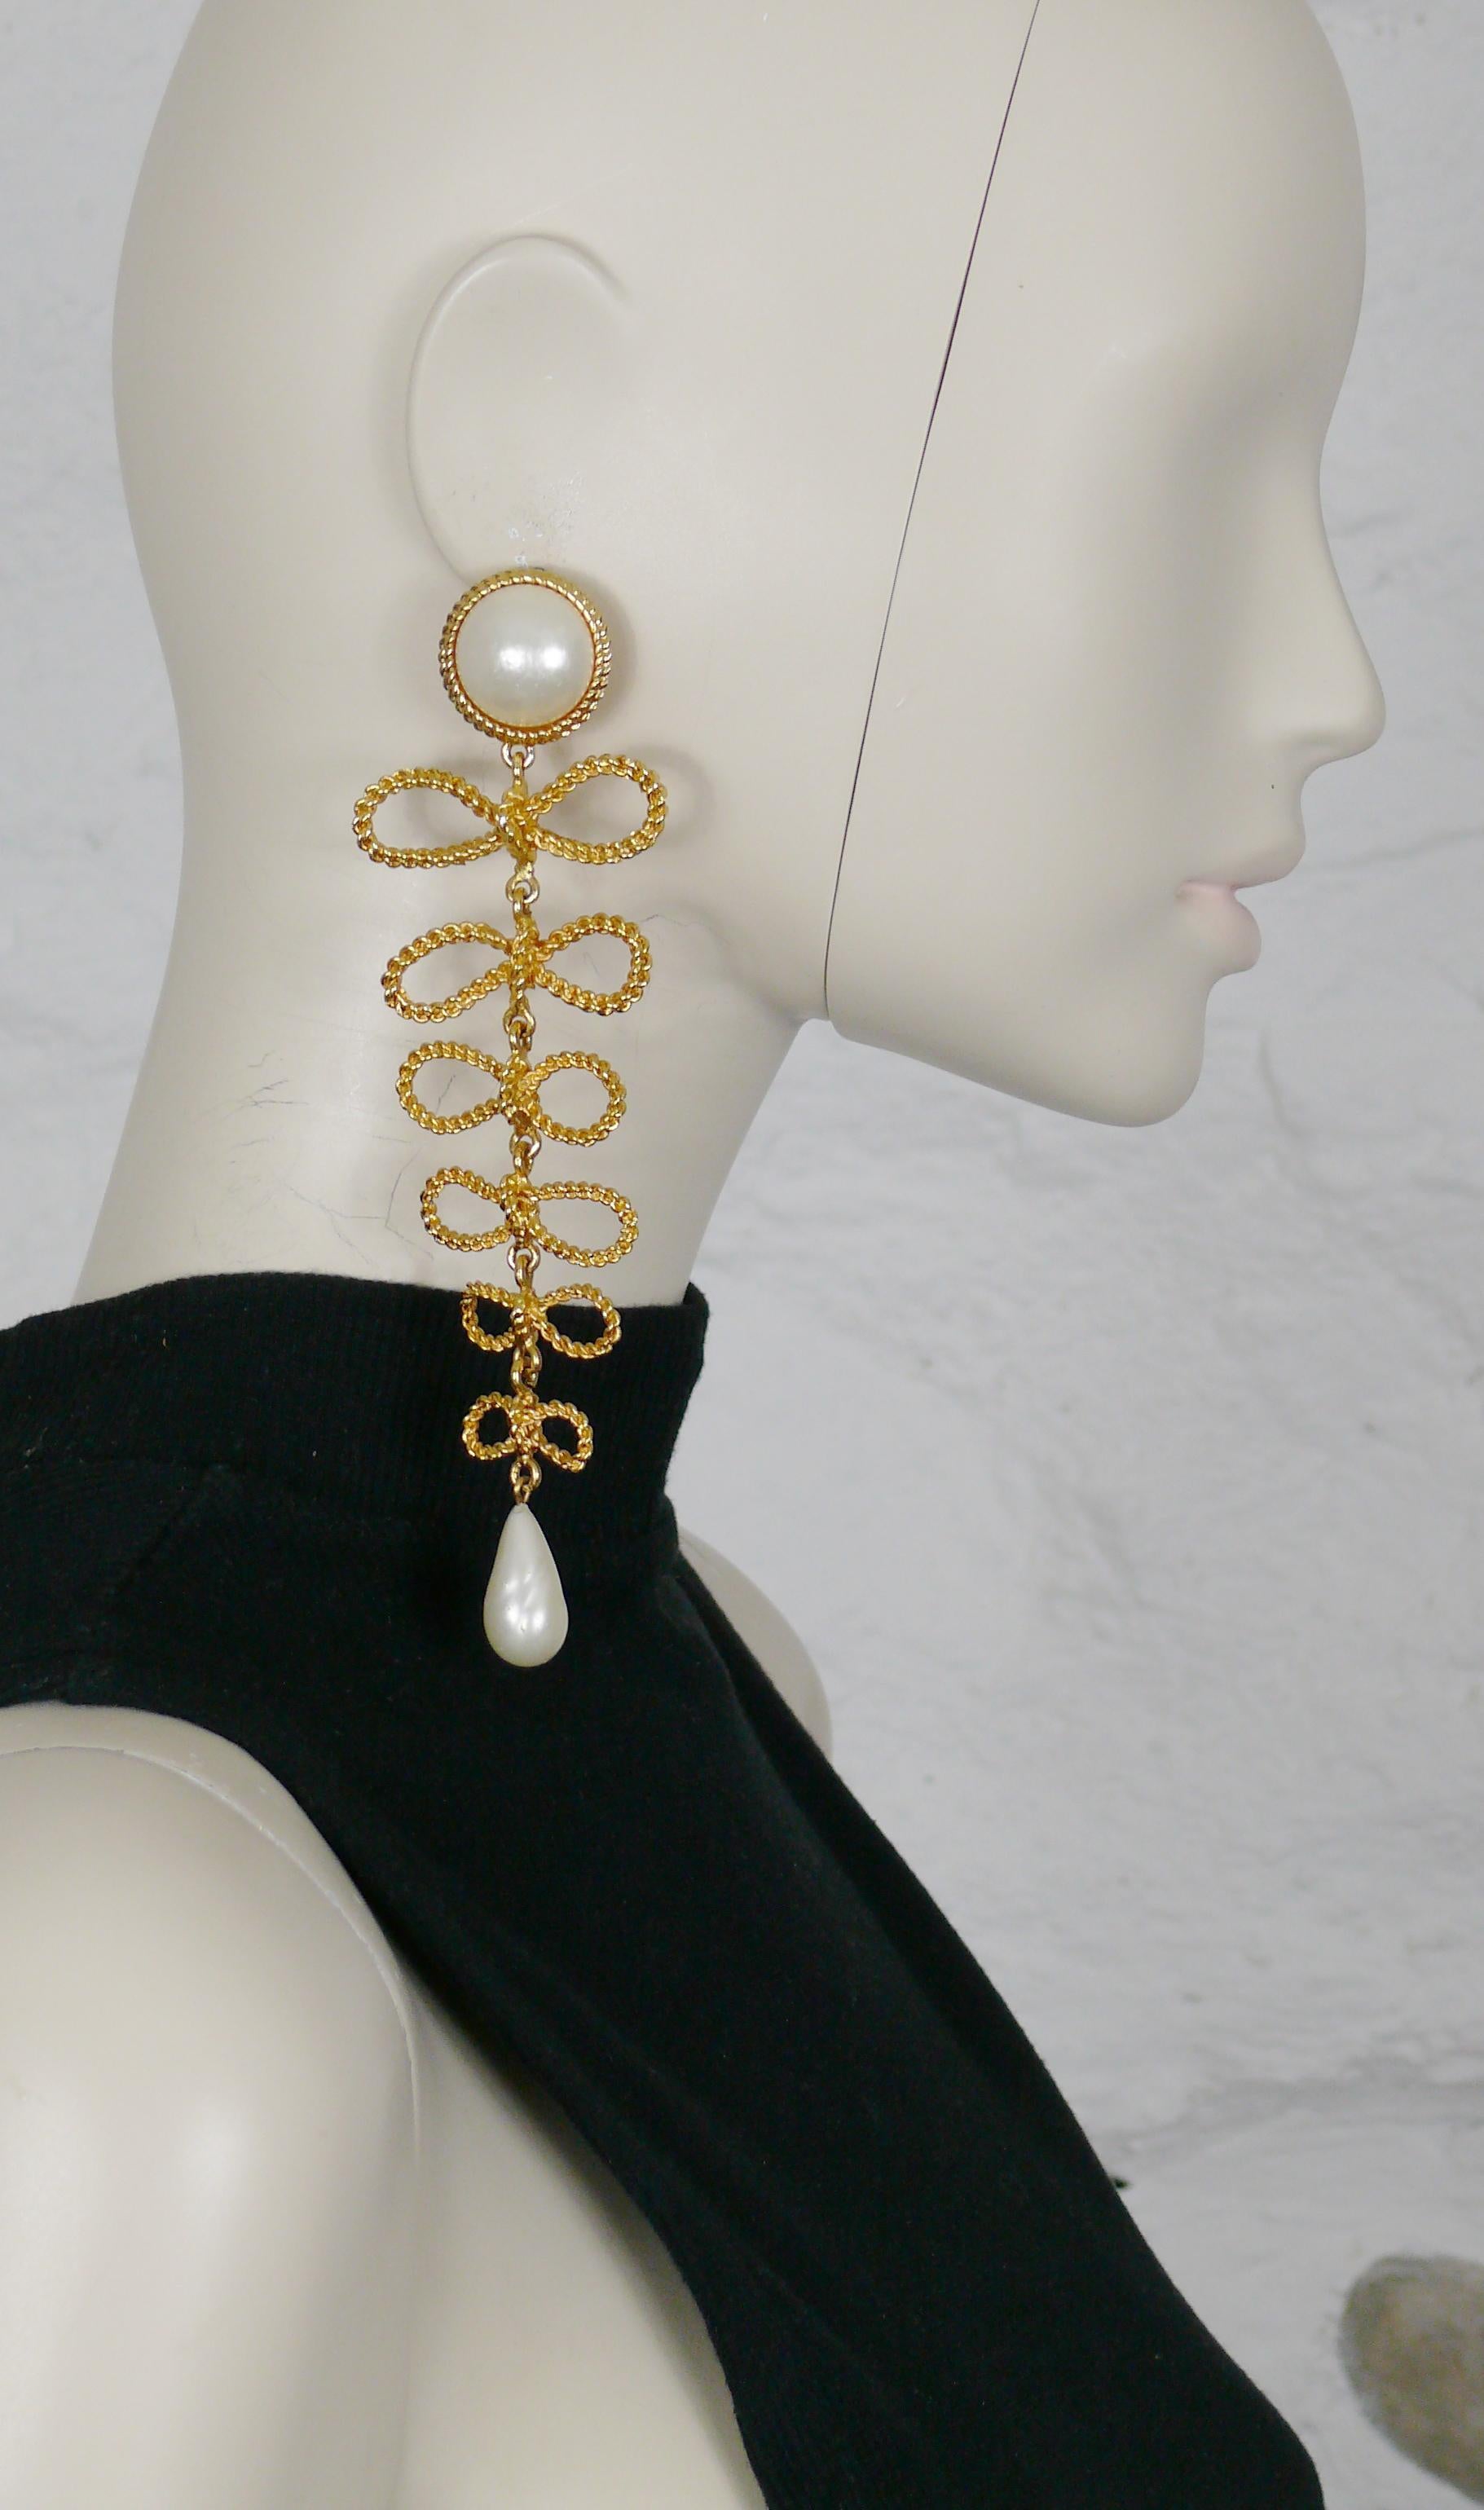 CHANEL vintage rare extra long dangling earrings (clip-on) featuring 6 graduated braided rope bows embellished with glass faux pearls.

Embossed CHANEL.
Private sale 